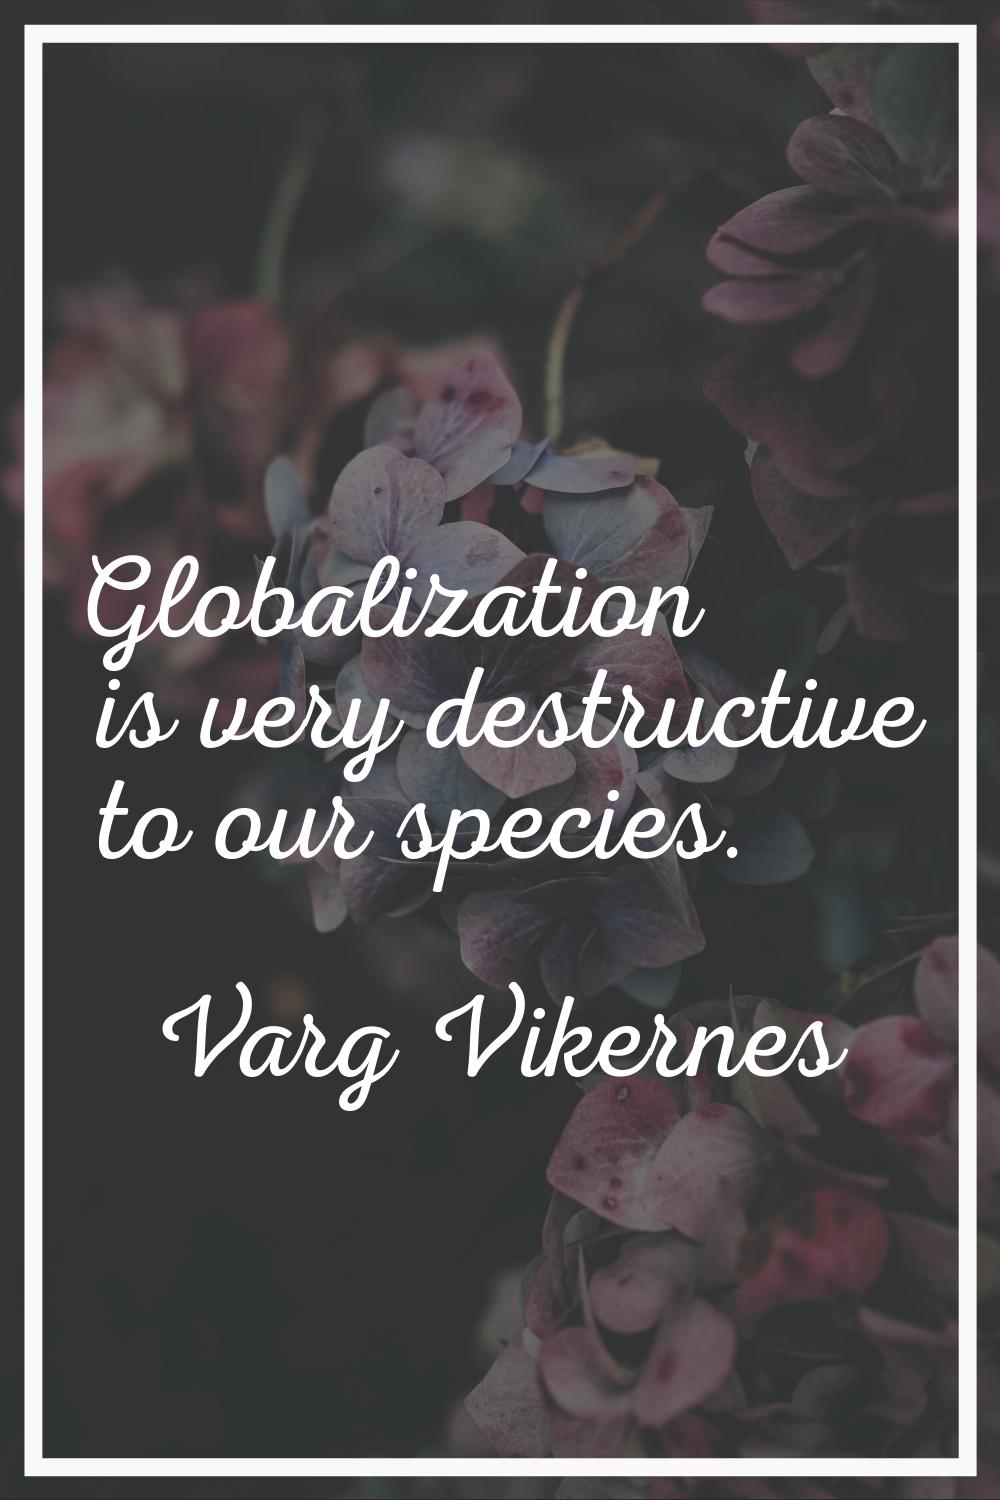 Globalization is very destructive to our species.